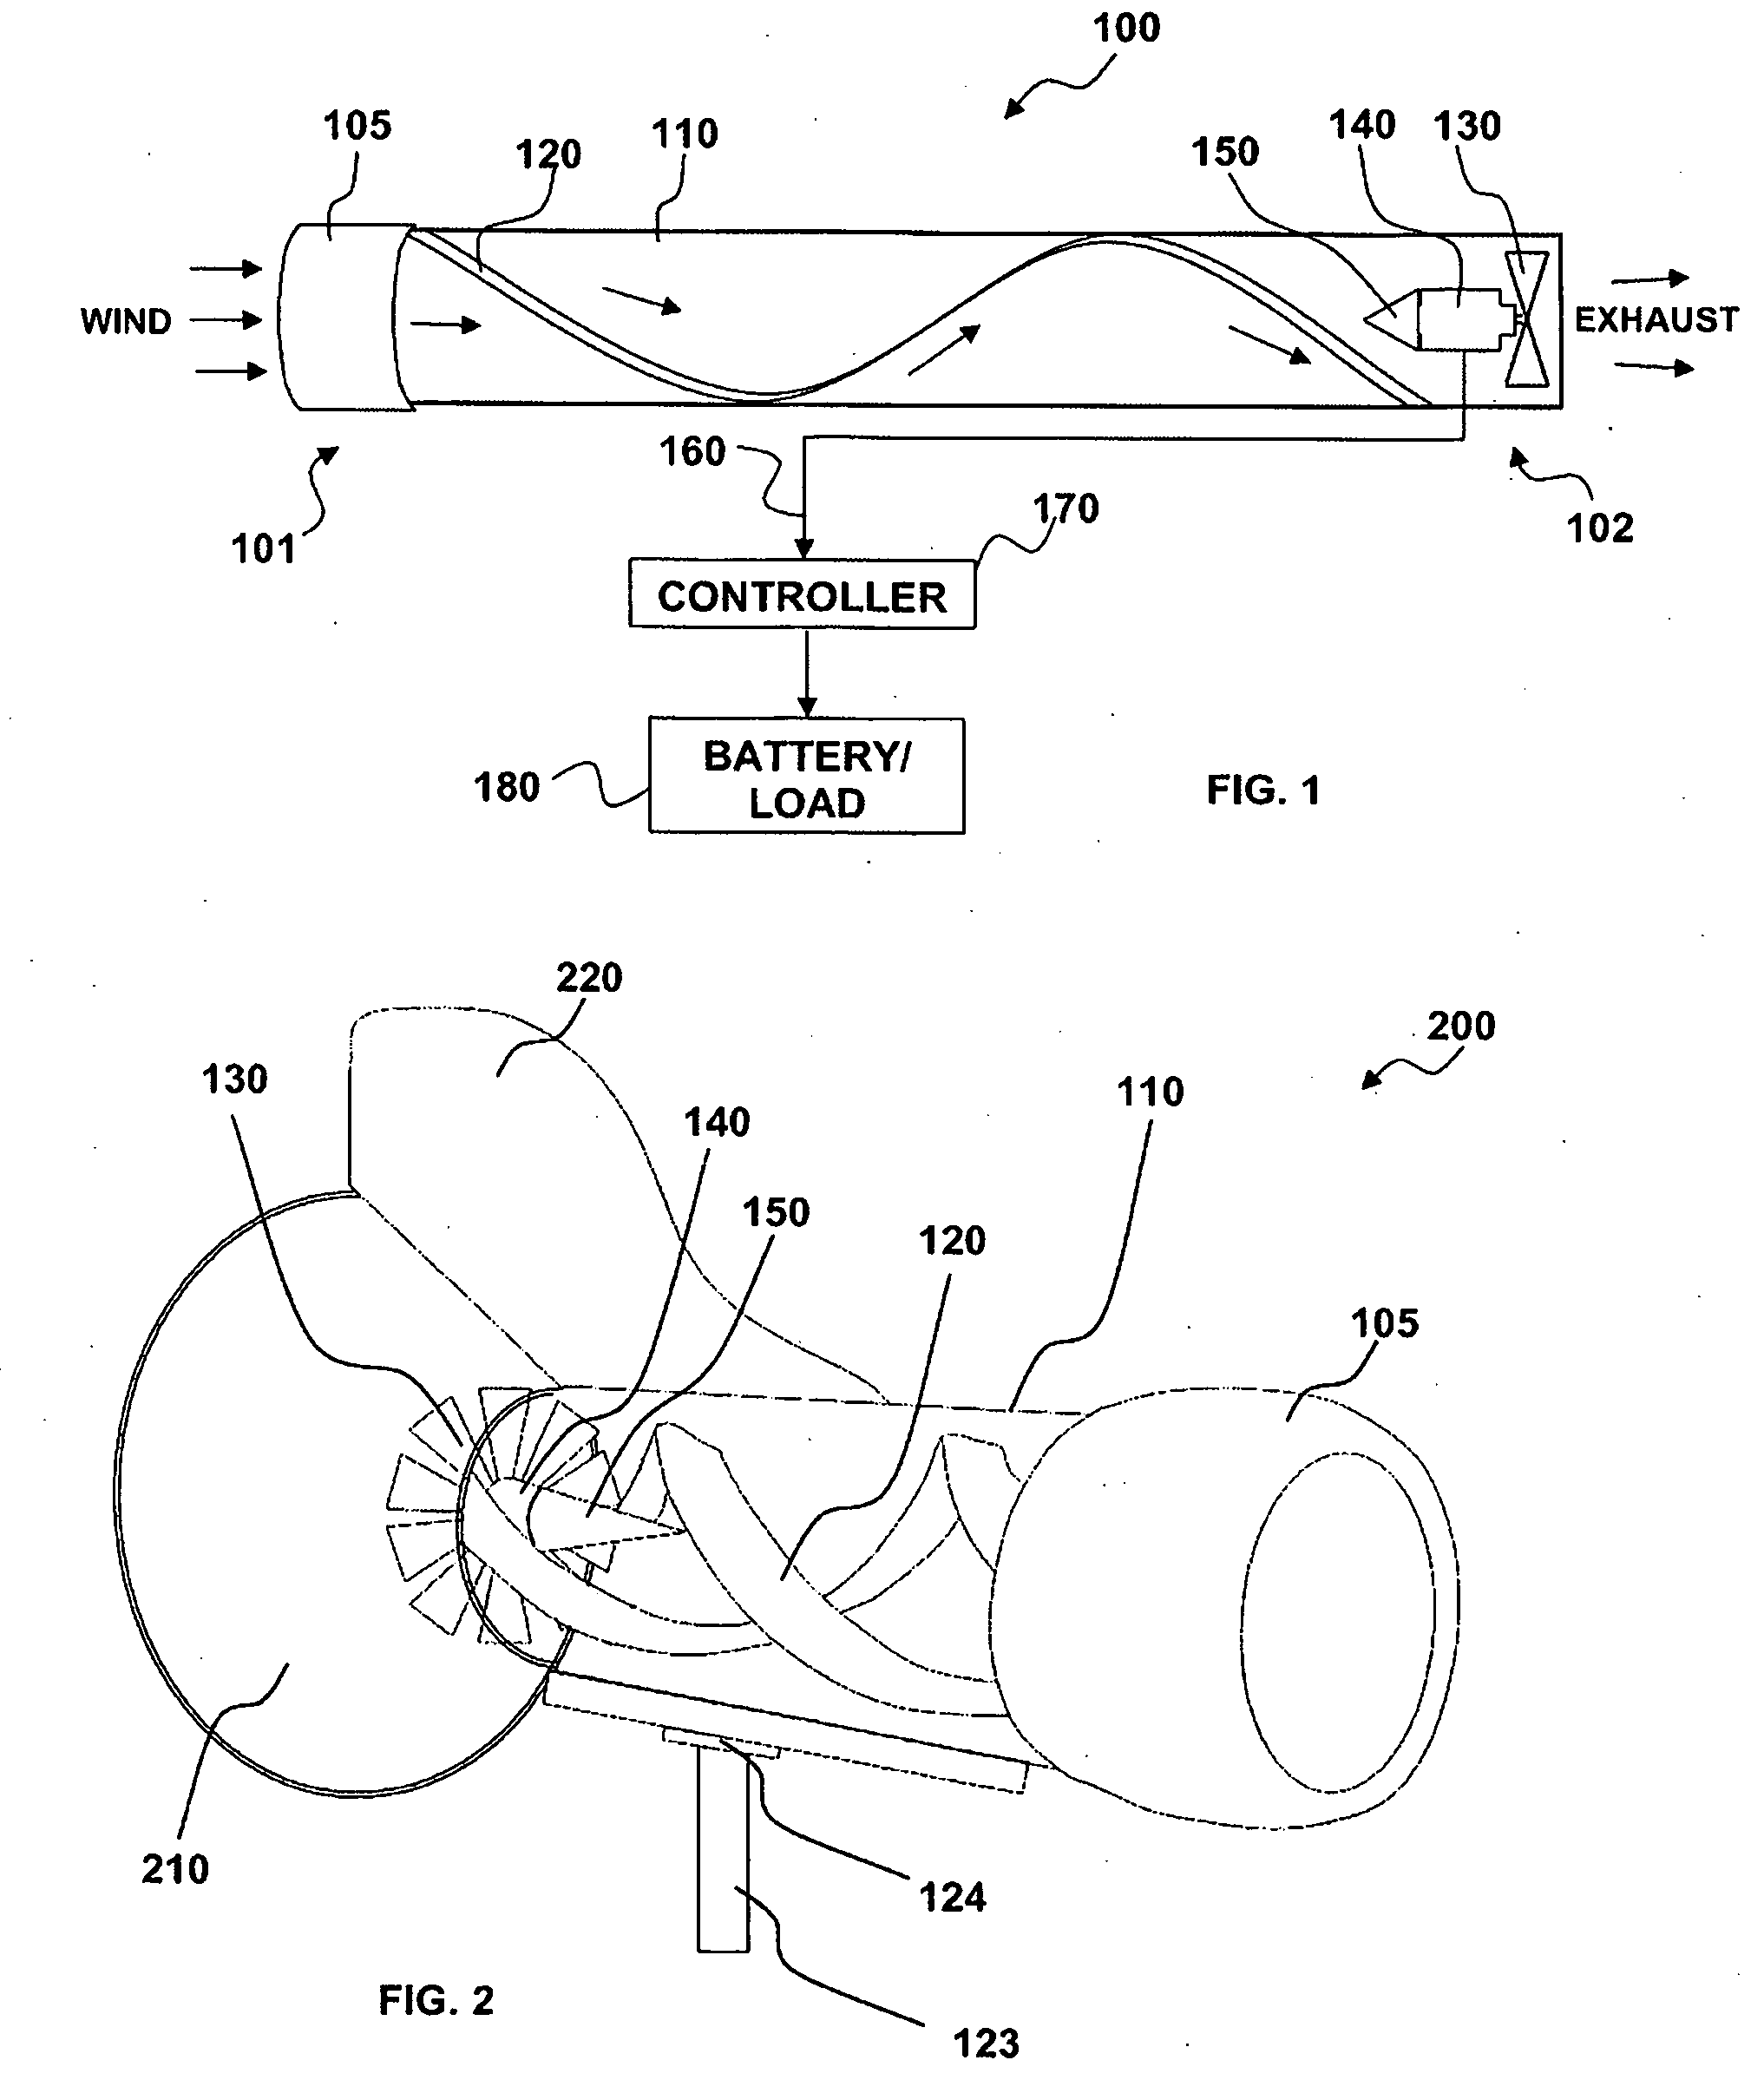 Wind-driven electric power generation system